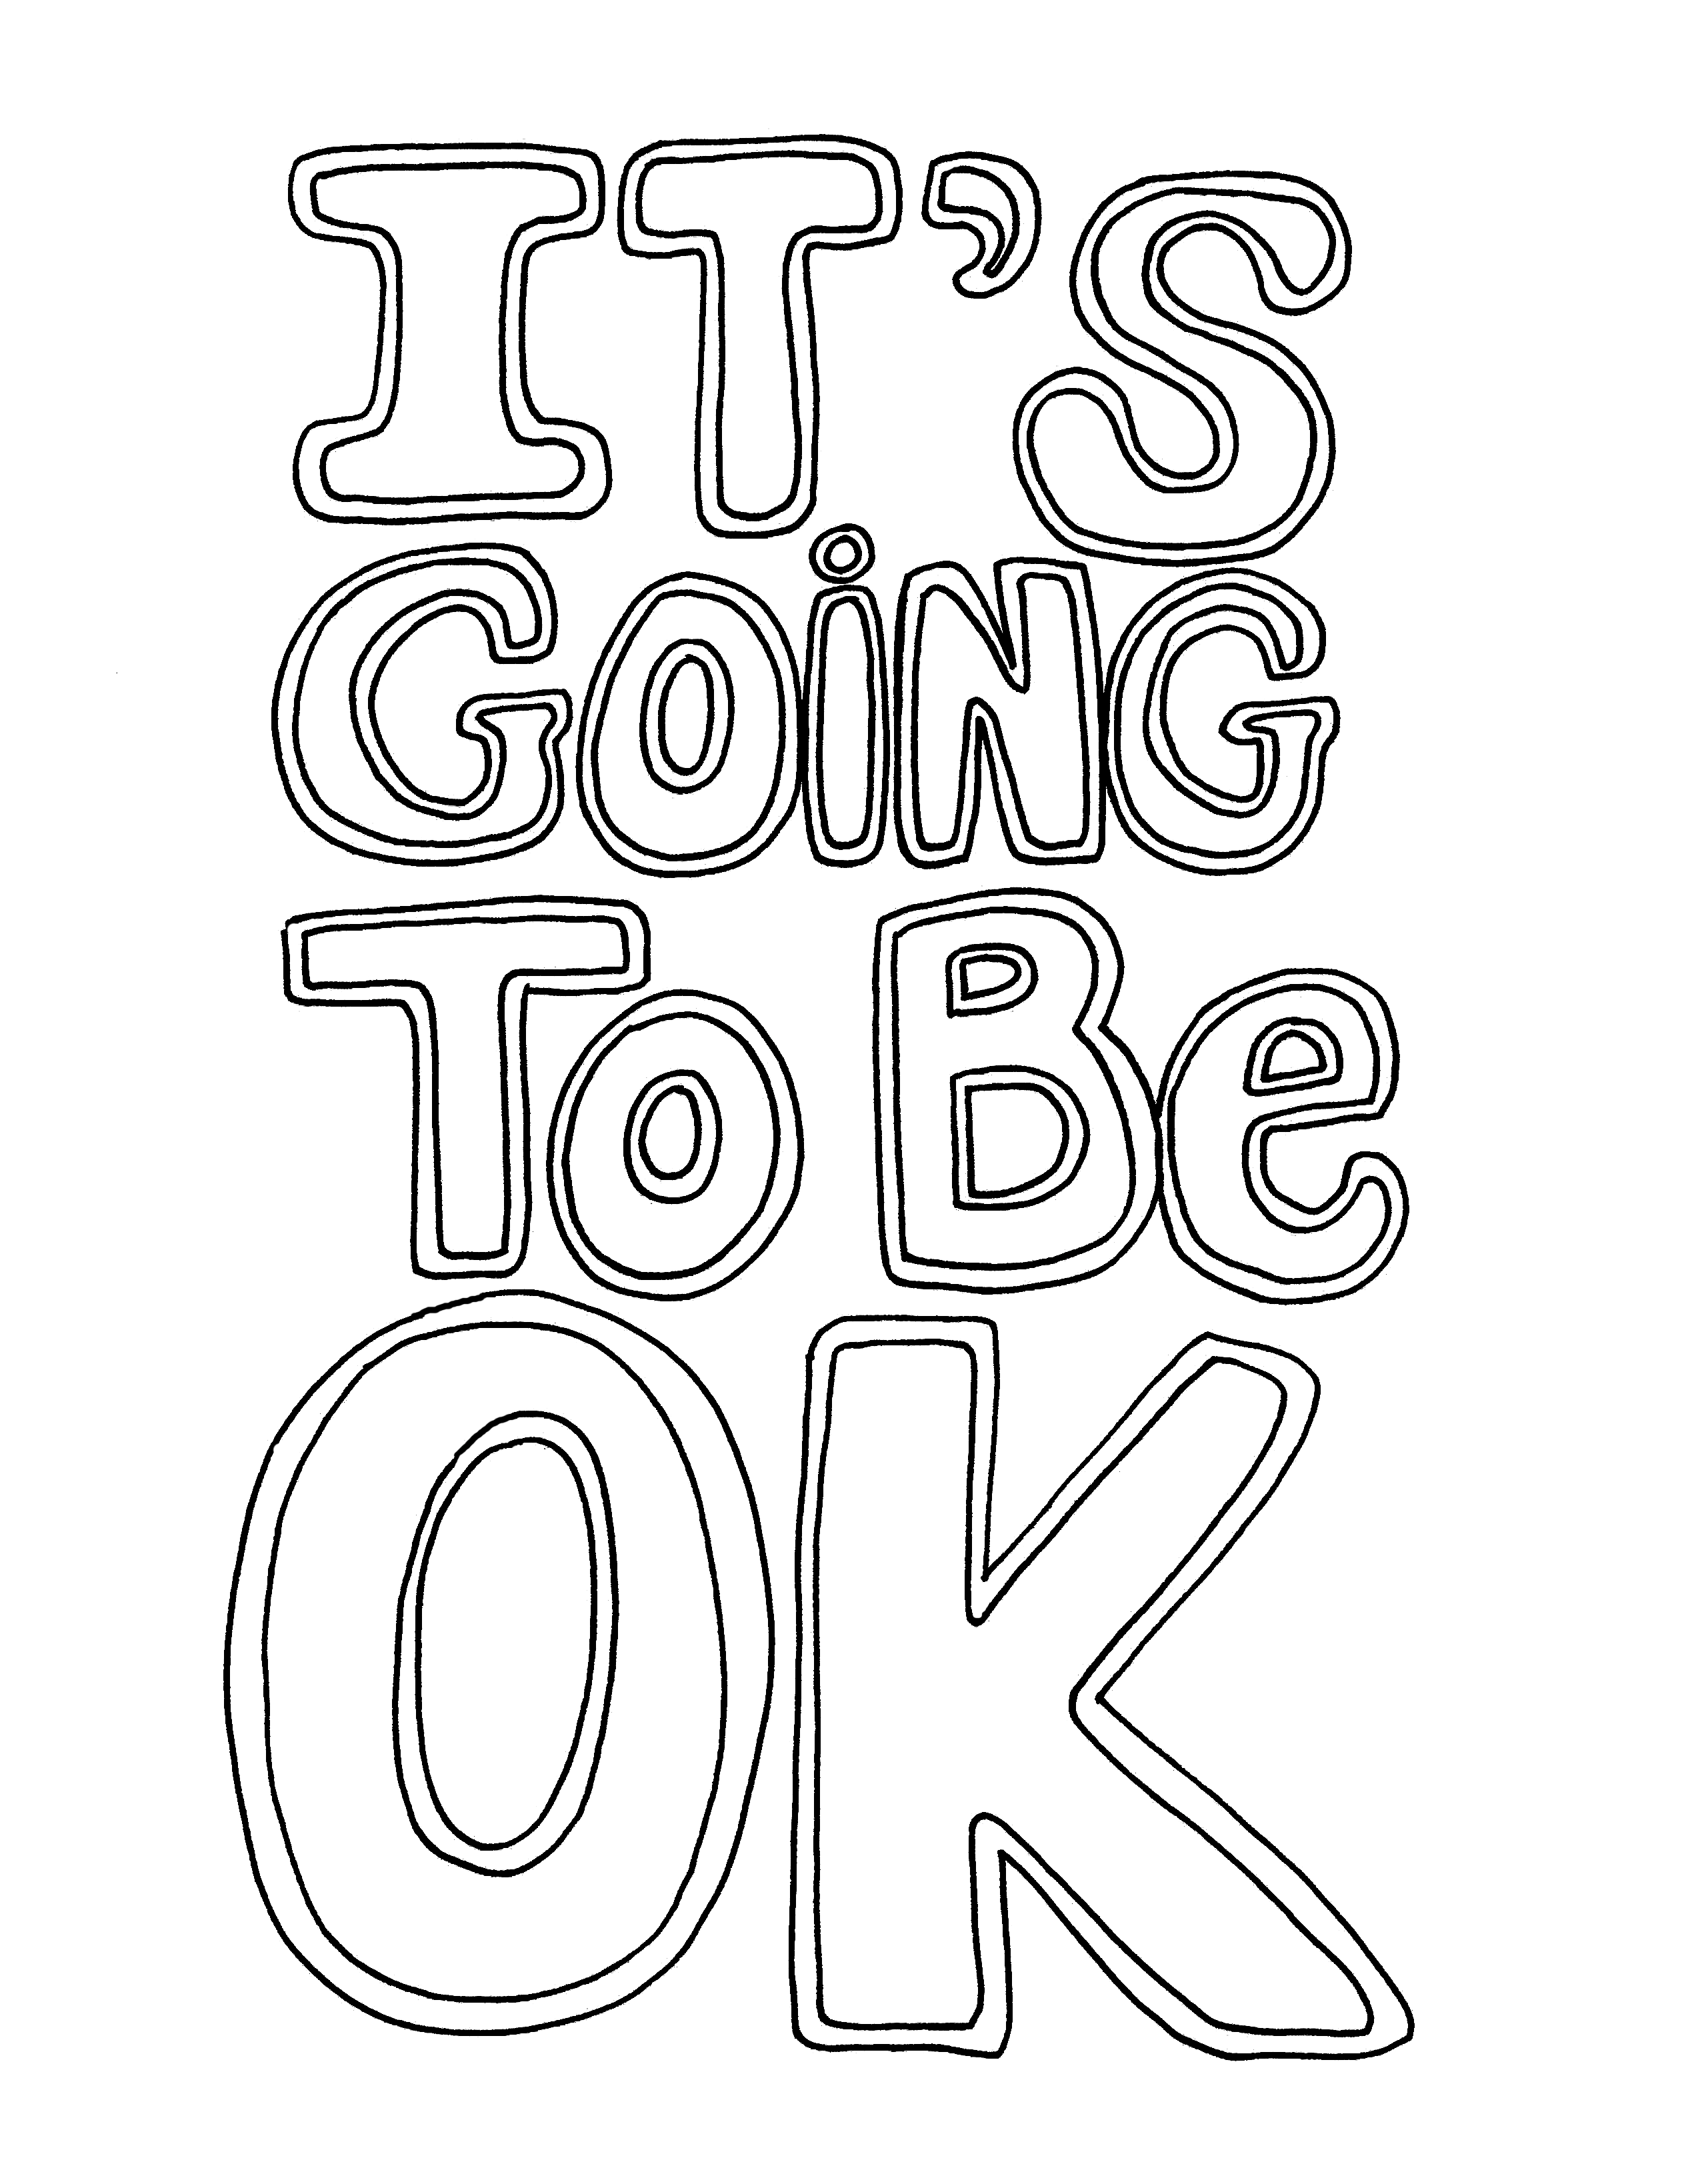 It's Going To Be OK - Double Lines - You-Color